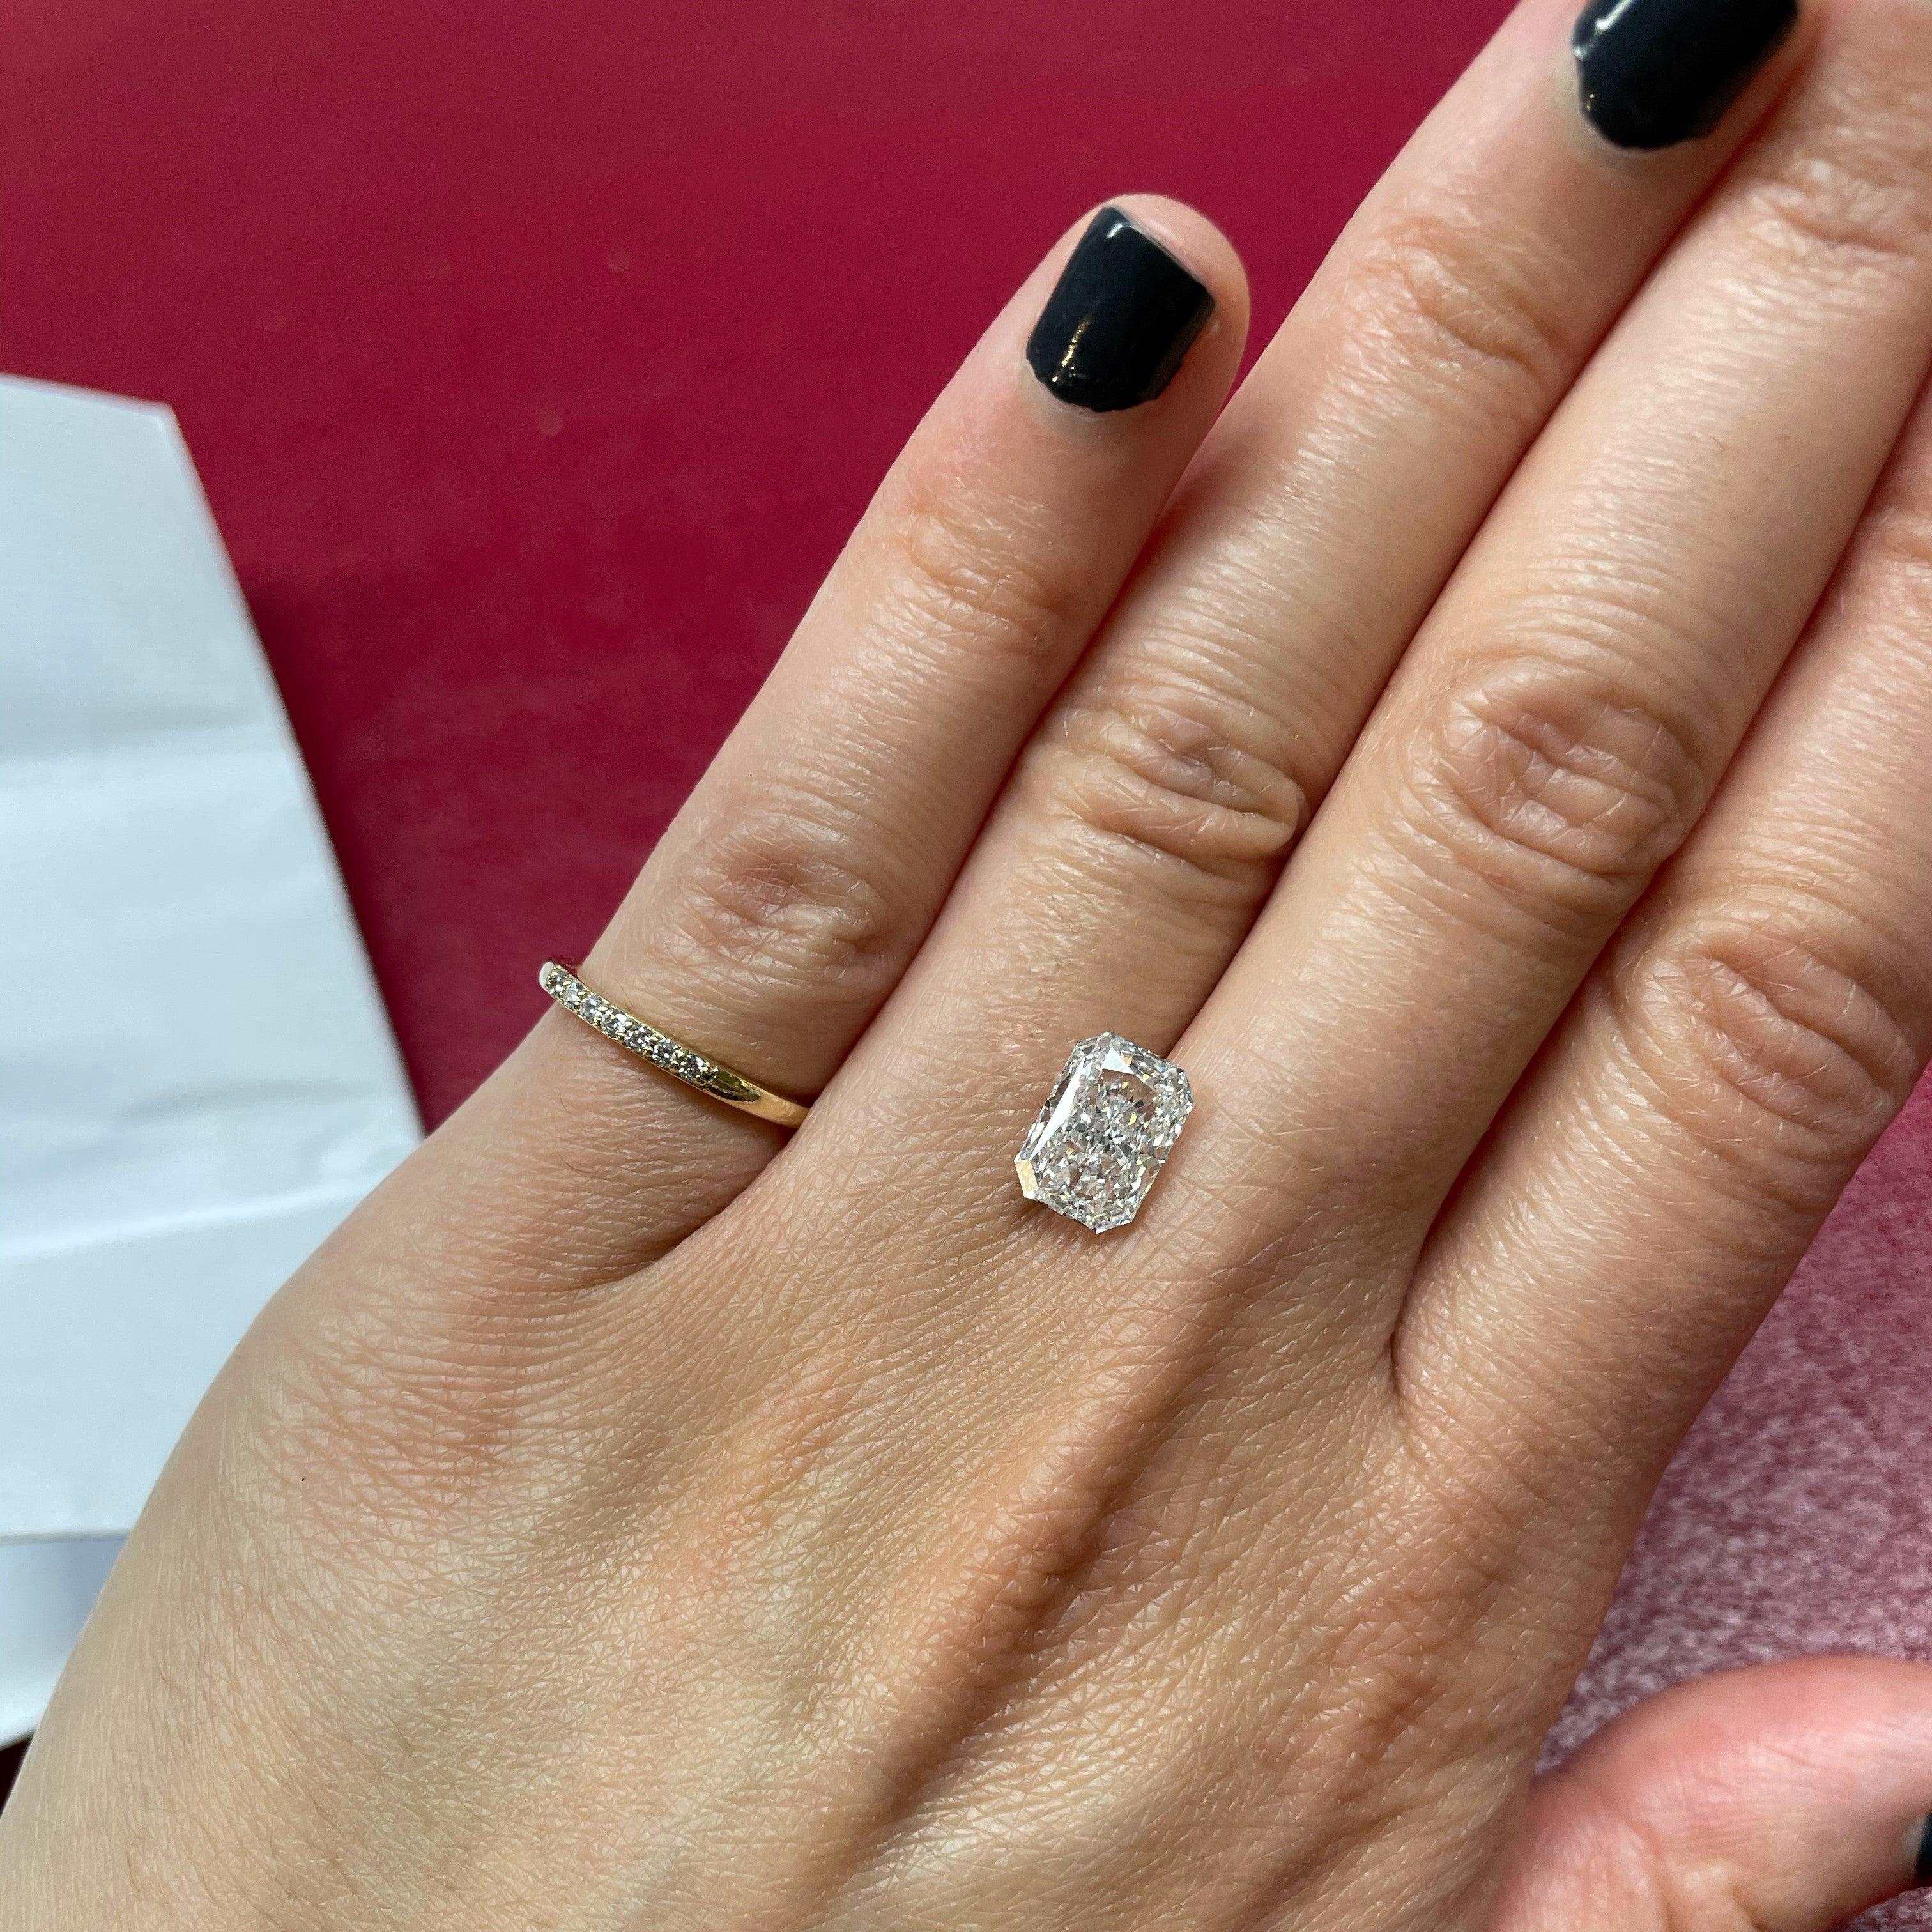 This diamond band ring is the definition of everyday fine jewelry with an air elegance. Simple enough to wear on a daily basis, chic enough to wear to any occasion. The perfect piece to complete the look whether it’s a casual outfit in jeans or